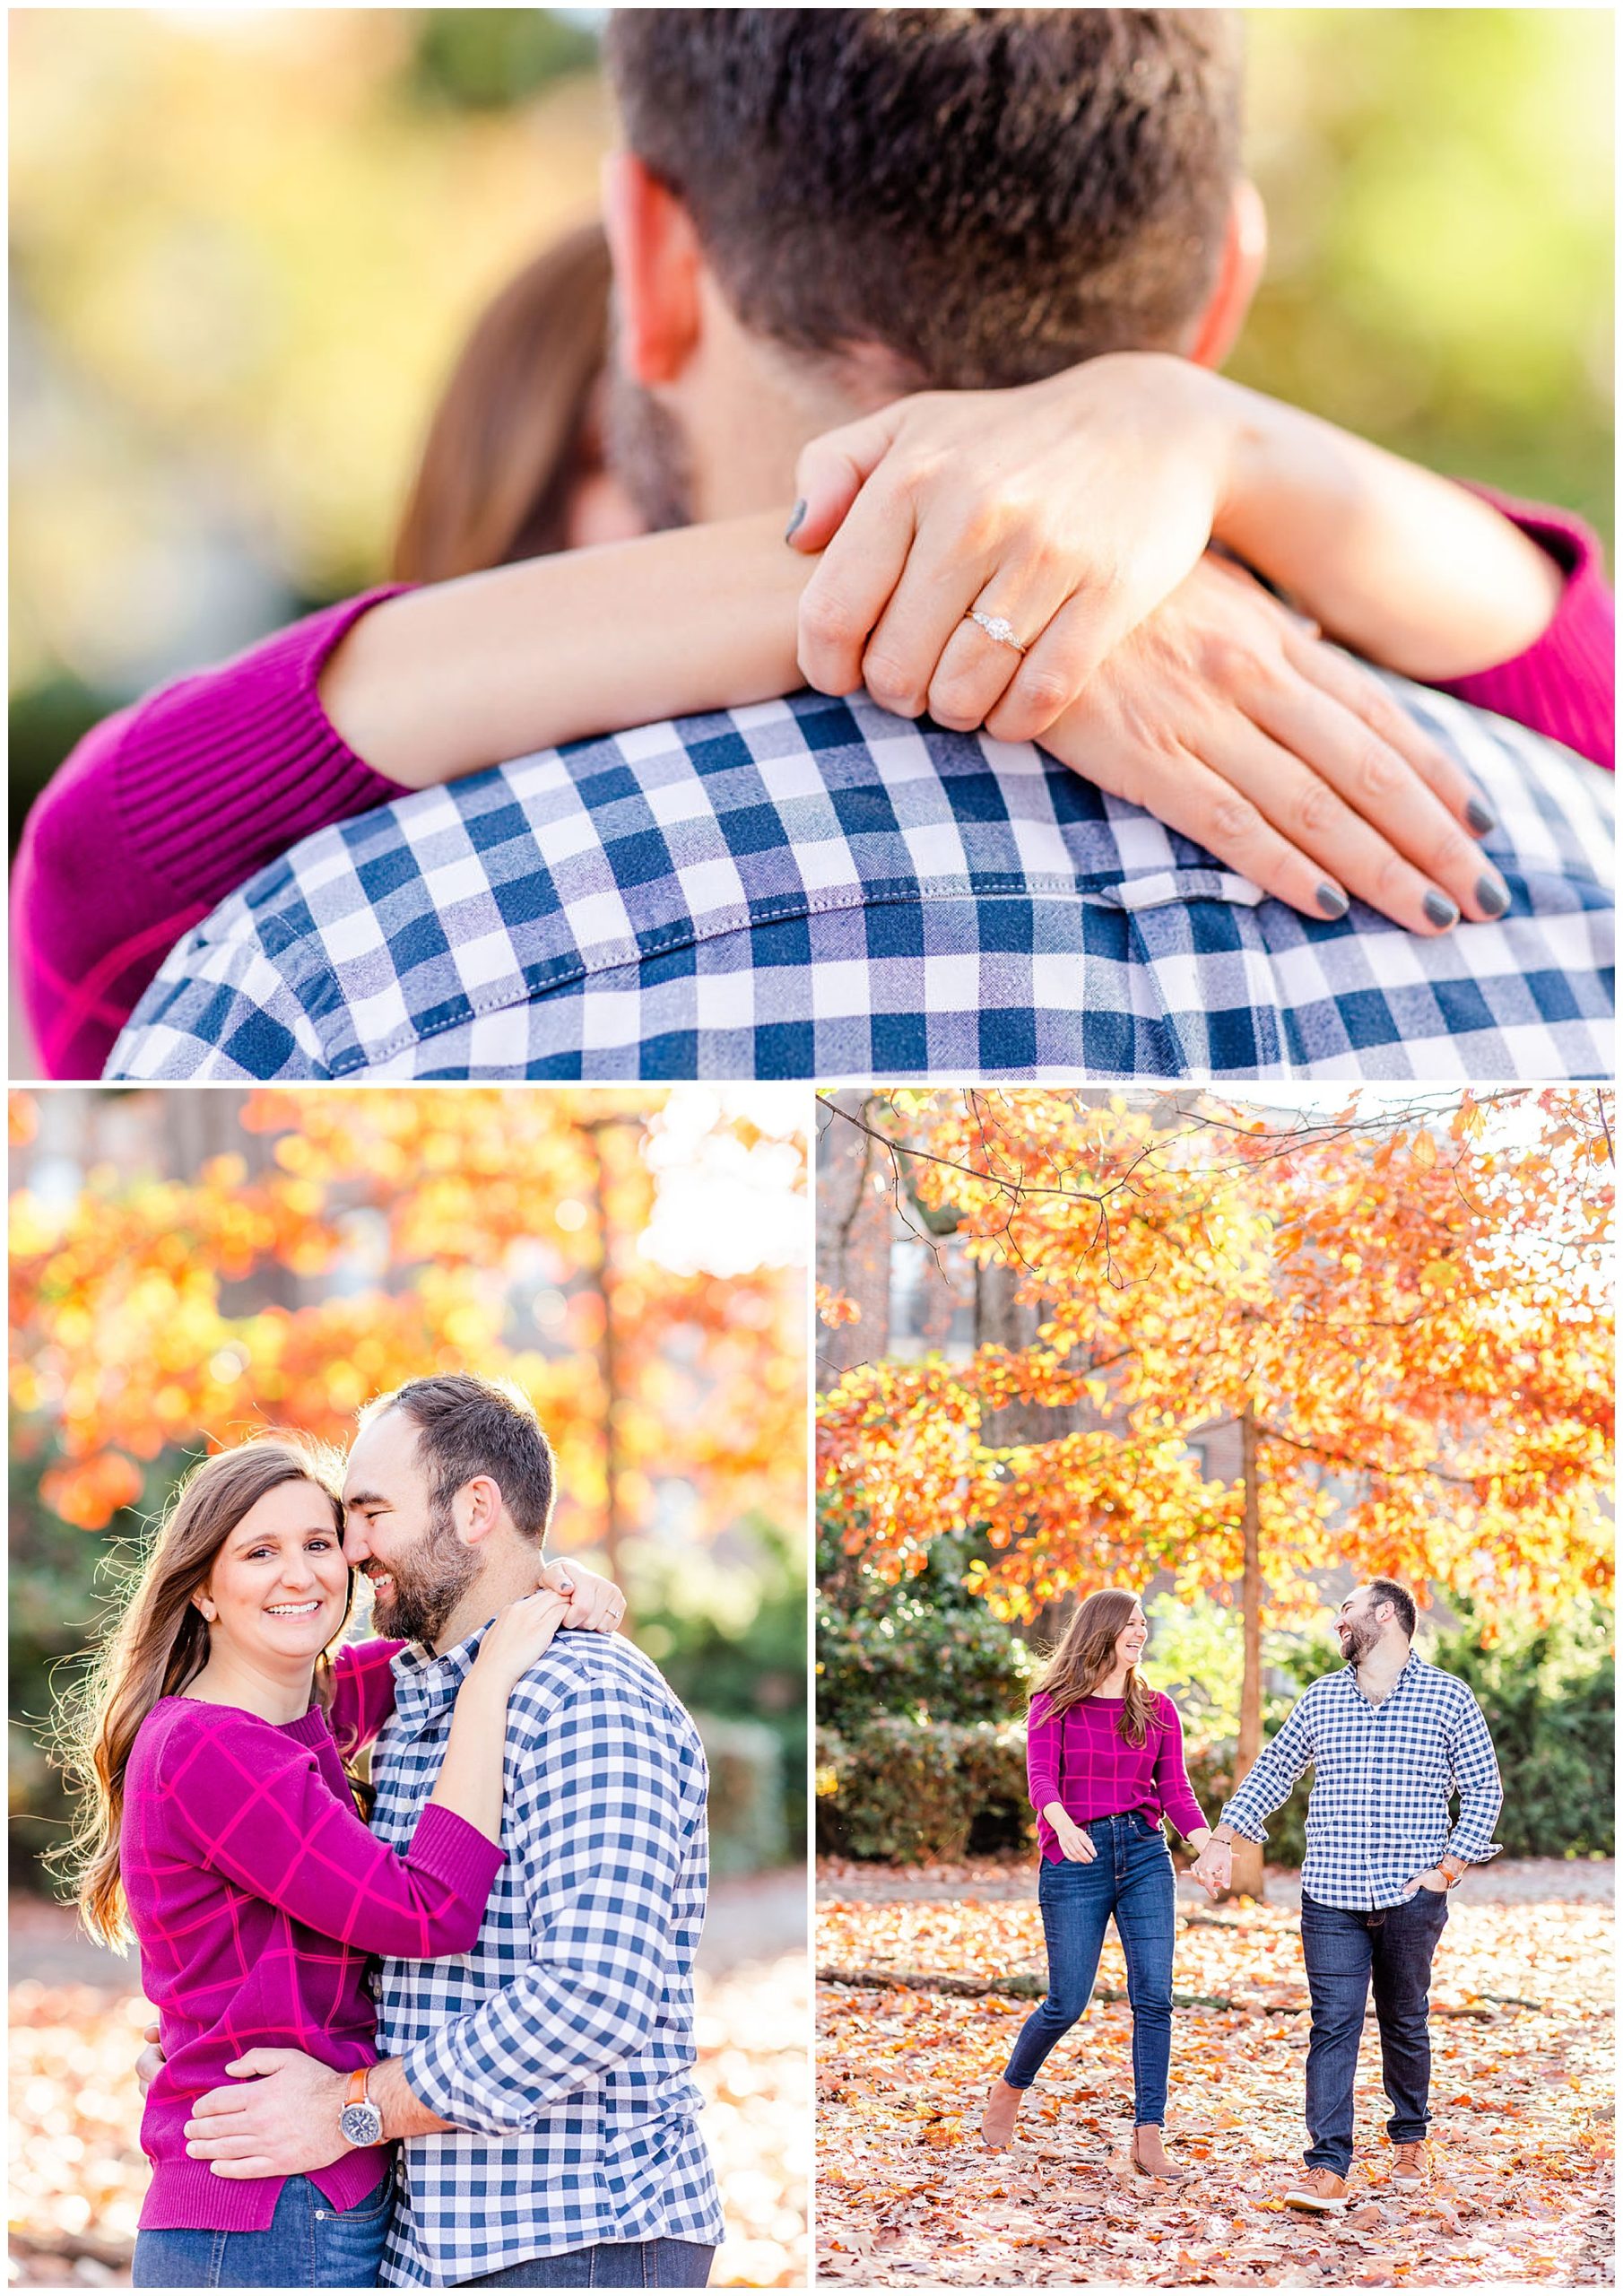 Meridian Hill Park engagement session, Meridian Hill Park DC, DC engagement photography, DC engagement photos, DC engagement session, DC engagement photographer, DC proposal photographer, DC wedding photographer, autumn engagement photos, Rachel E.H. Photography, woman with silver engagement ring, couple laughing 